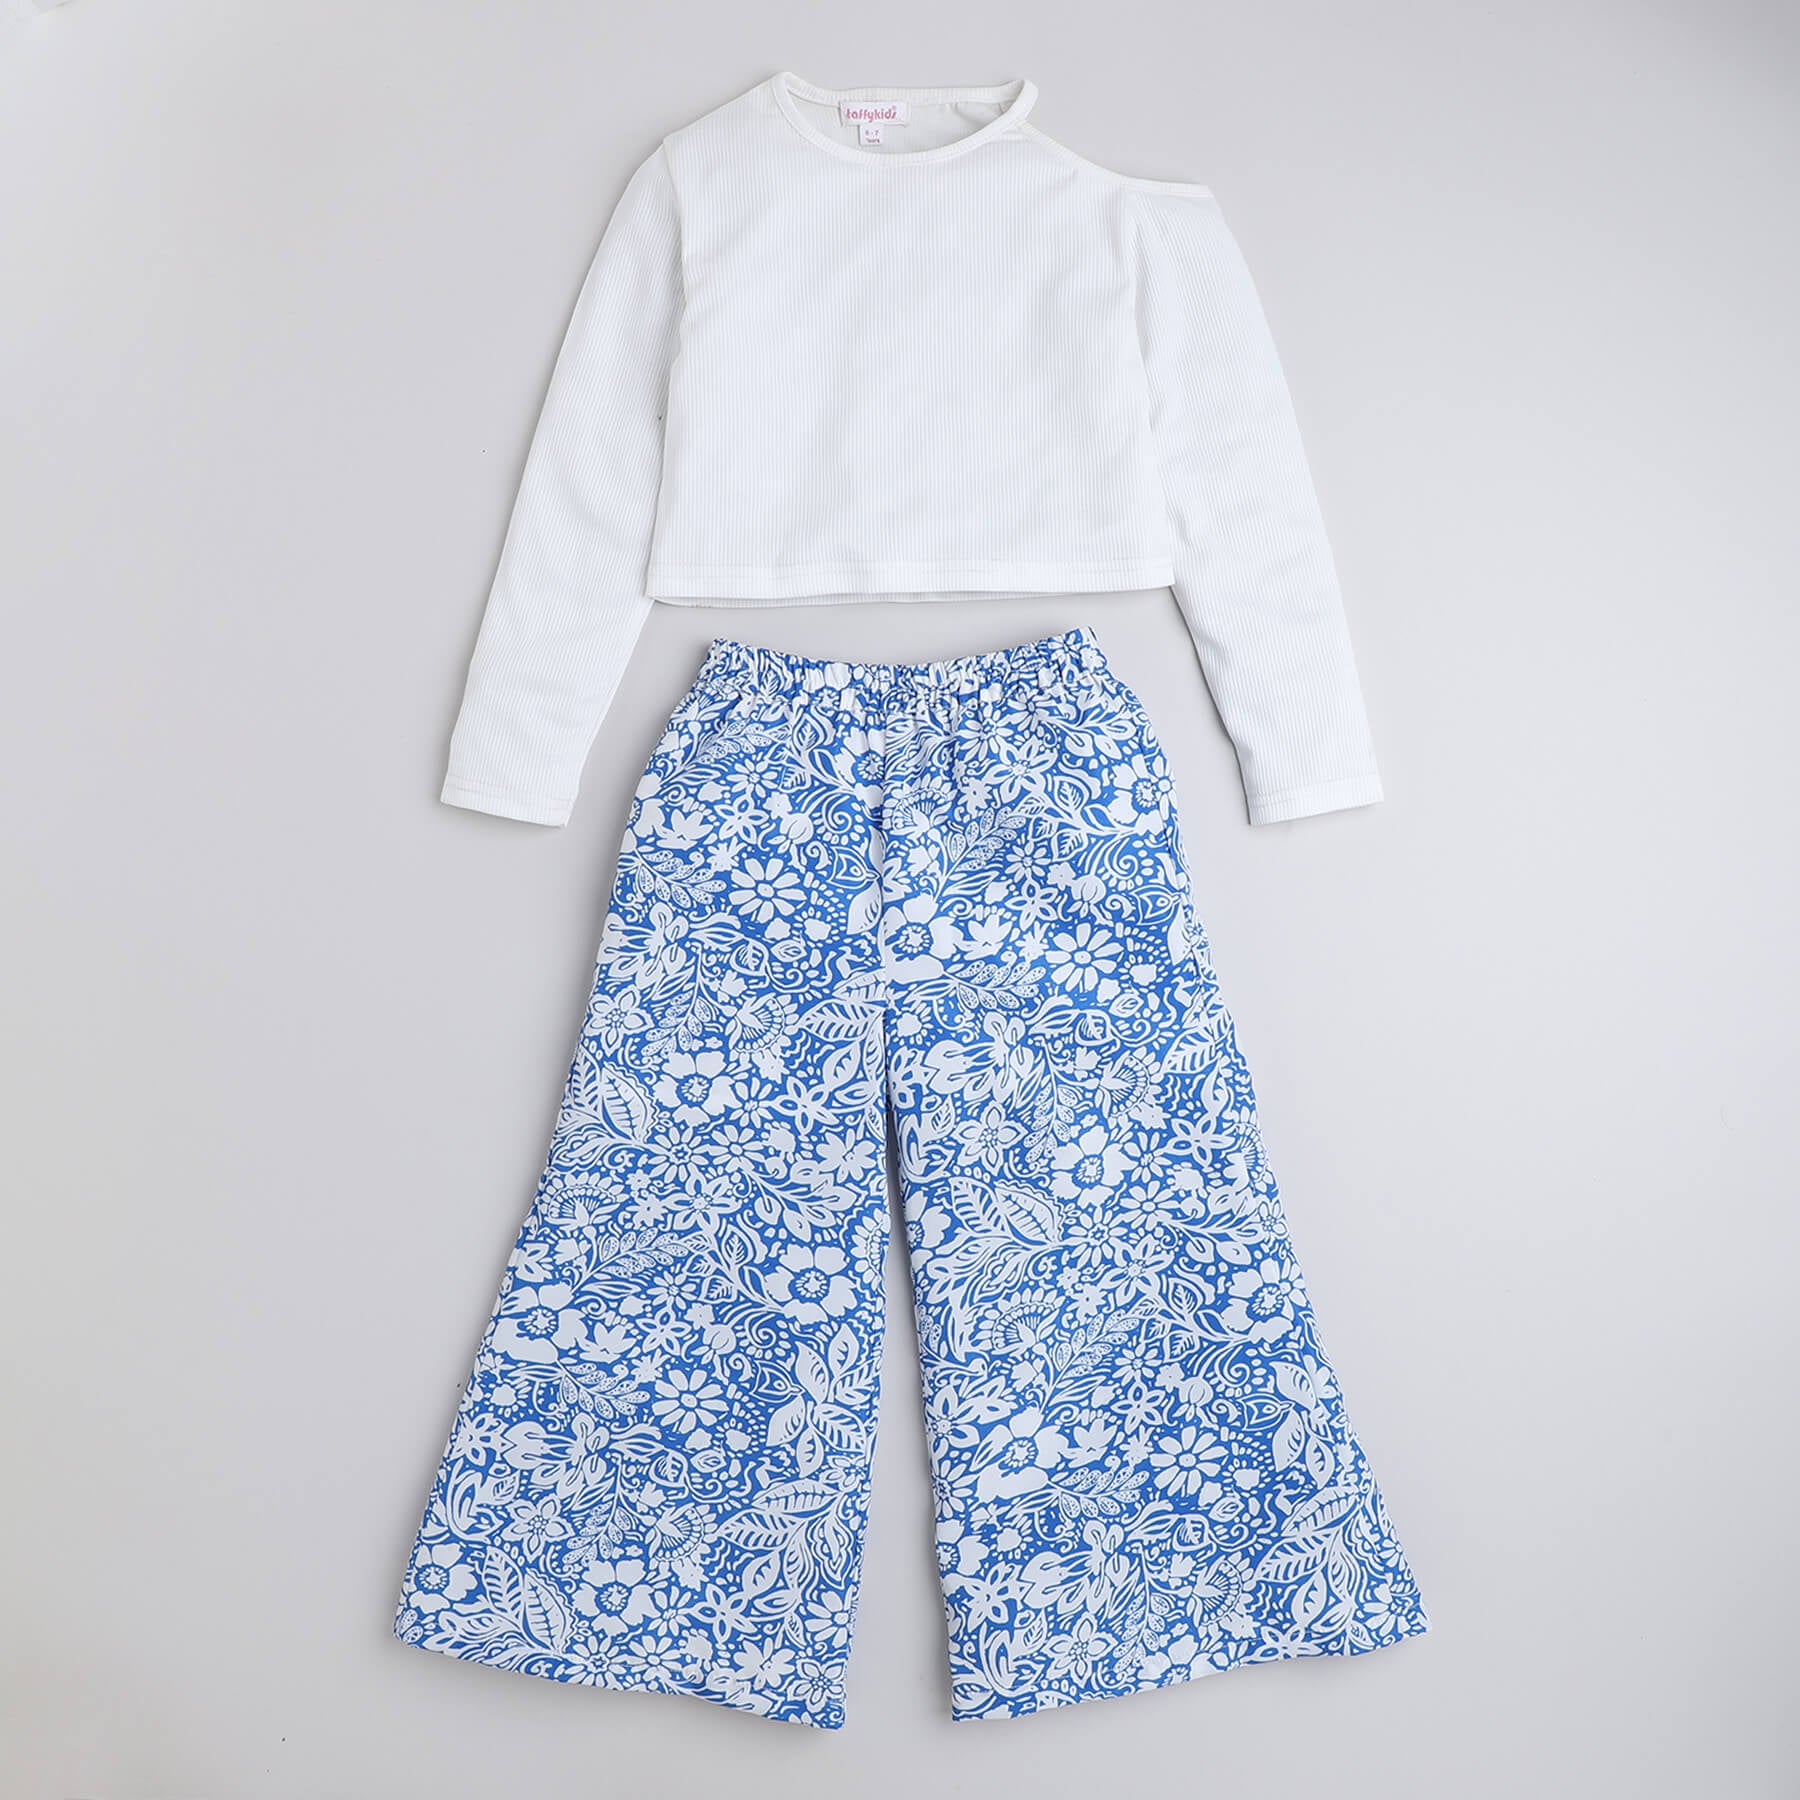 Taffykids Solid Full sleeves cut out detail top and Floral printed pant set-White/Blue